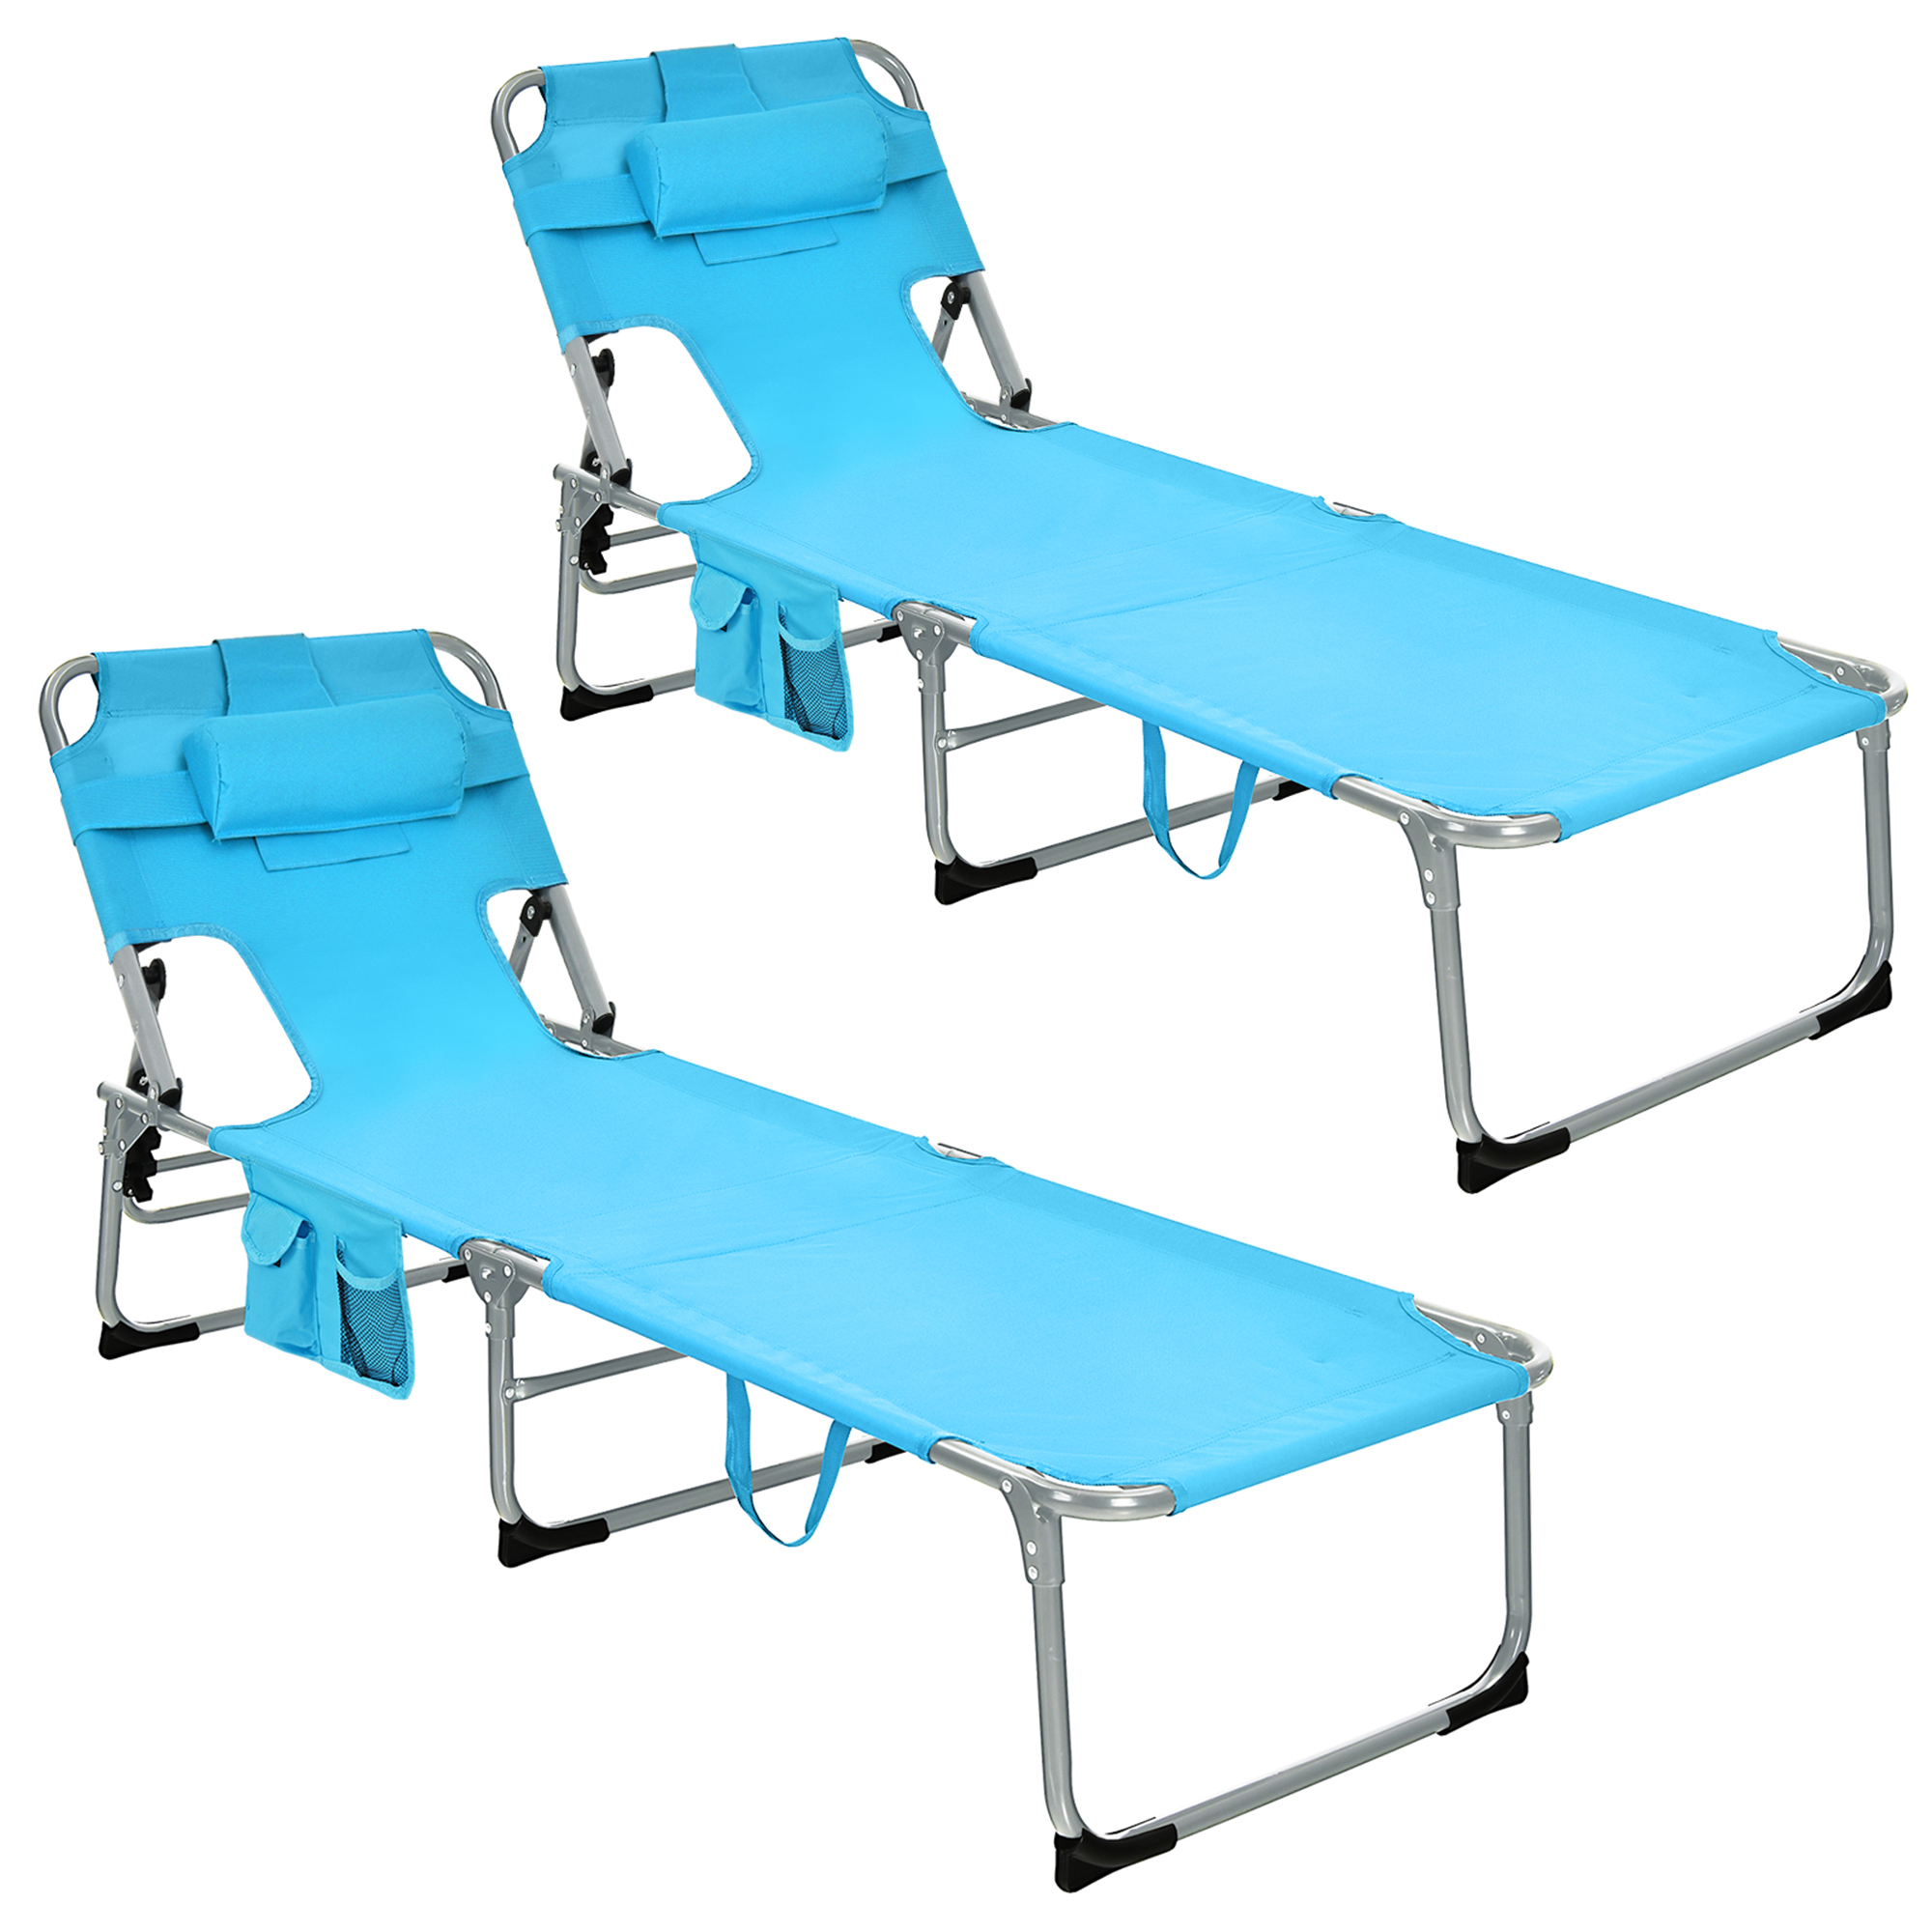 Gymax Set of 2 Beach Chaise Lounge Chair Folding Reclining Chair w/ Facing Hole Turquoise - image 1 of 10